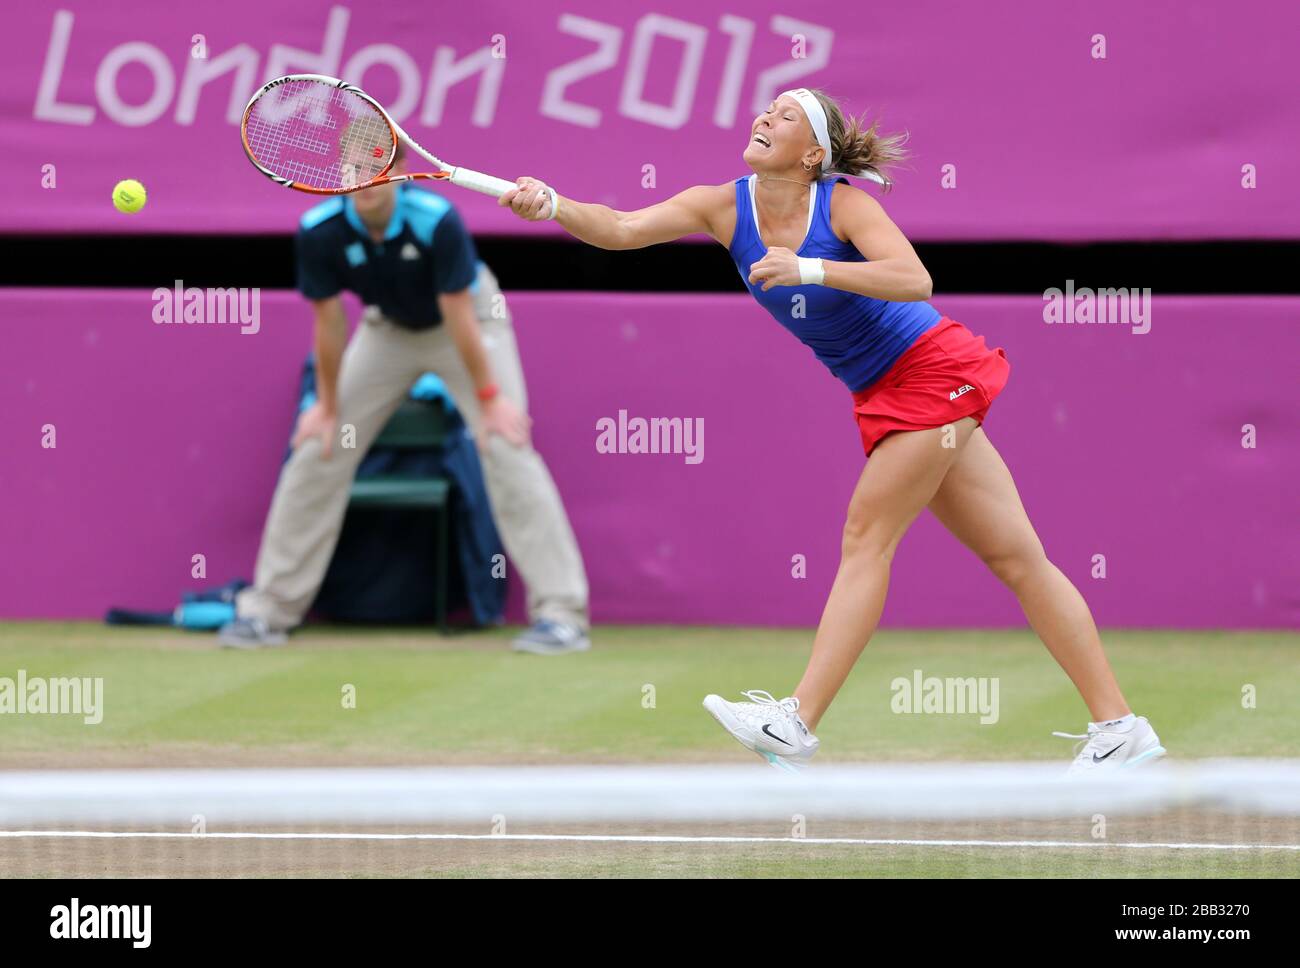 Women's tennis doubles player Lucie Hradecka of the Czech Republic in action in the final against Serena and Venus Williams  at Wimbledon at the London 2012 Olympics Stock Photo